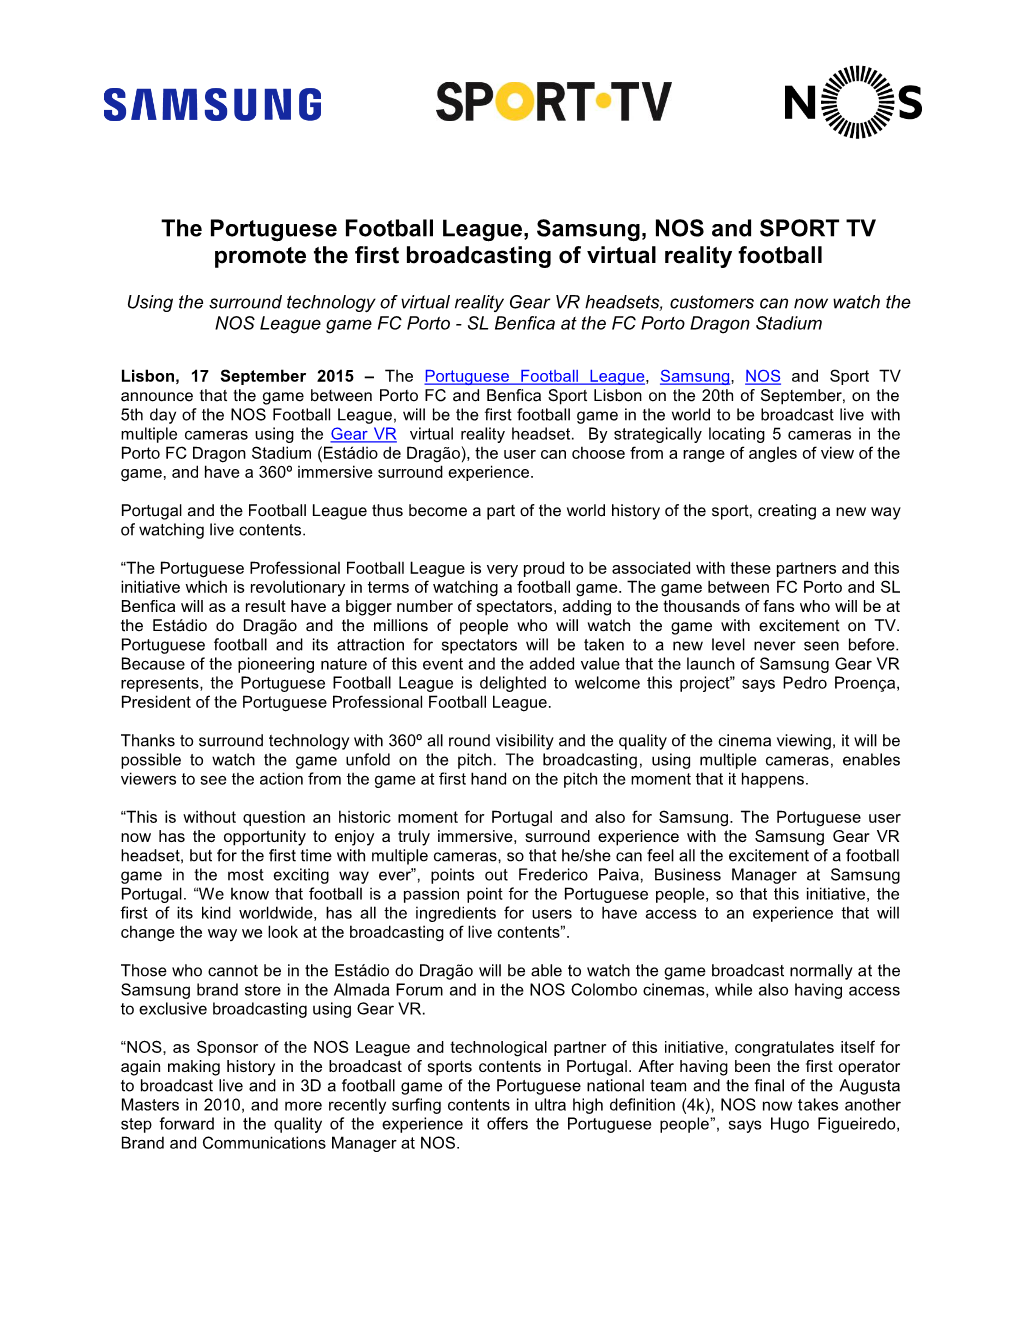 The Portuguese Football League, Samsung, NOS and SPORT TV Promote the First Broadcasting of Virtual Reality Football